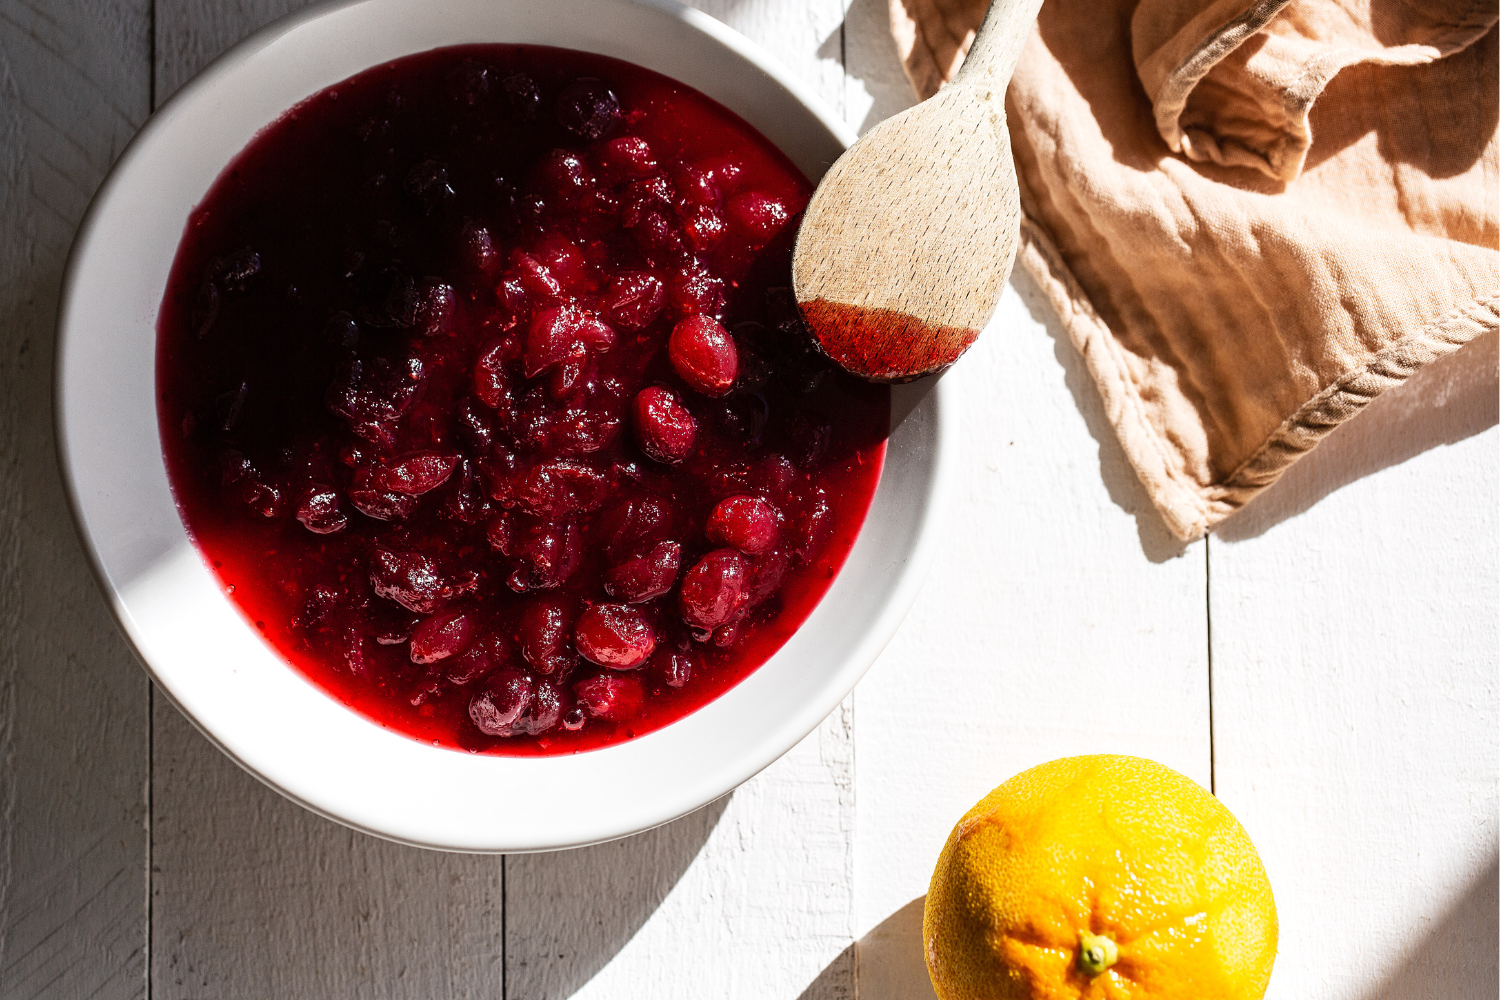 a bowl of cranberry sauce with a wooden spoon, next to an orange and a napkin.